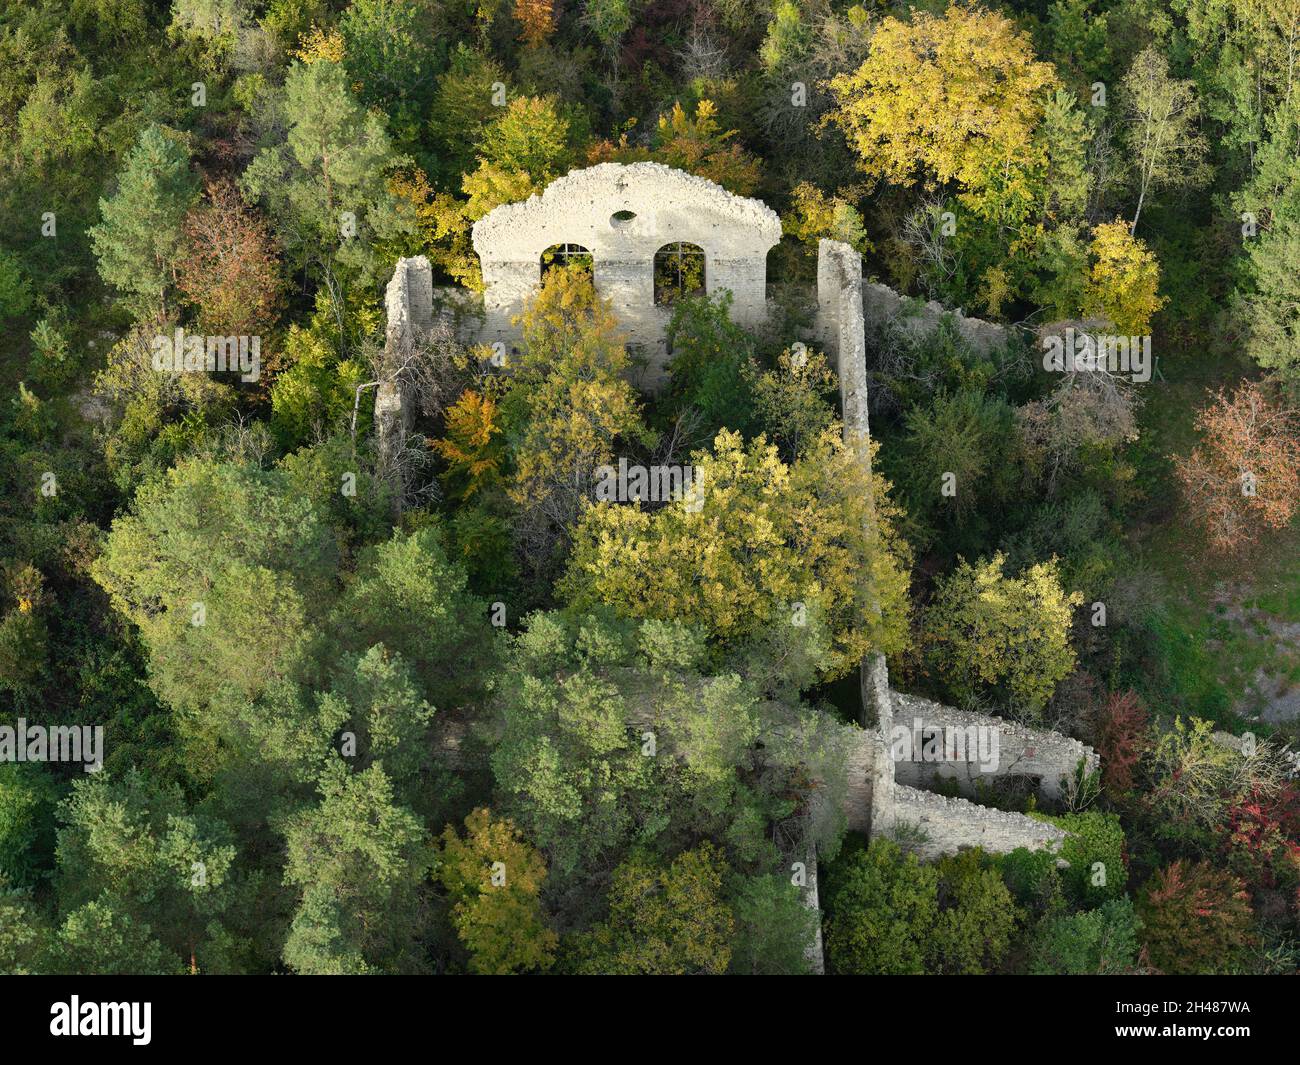 AERIAL VIEW. Building in ruins being overgrown by vegetation in the fall. Ville-sous-la-Ferté, Aube, Grand Est, France. Stock Photo